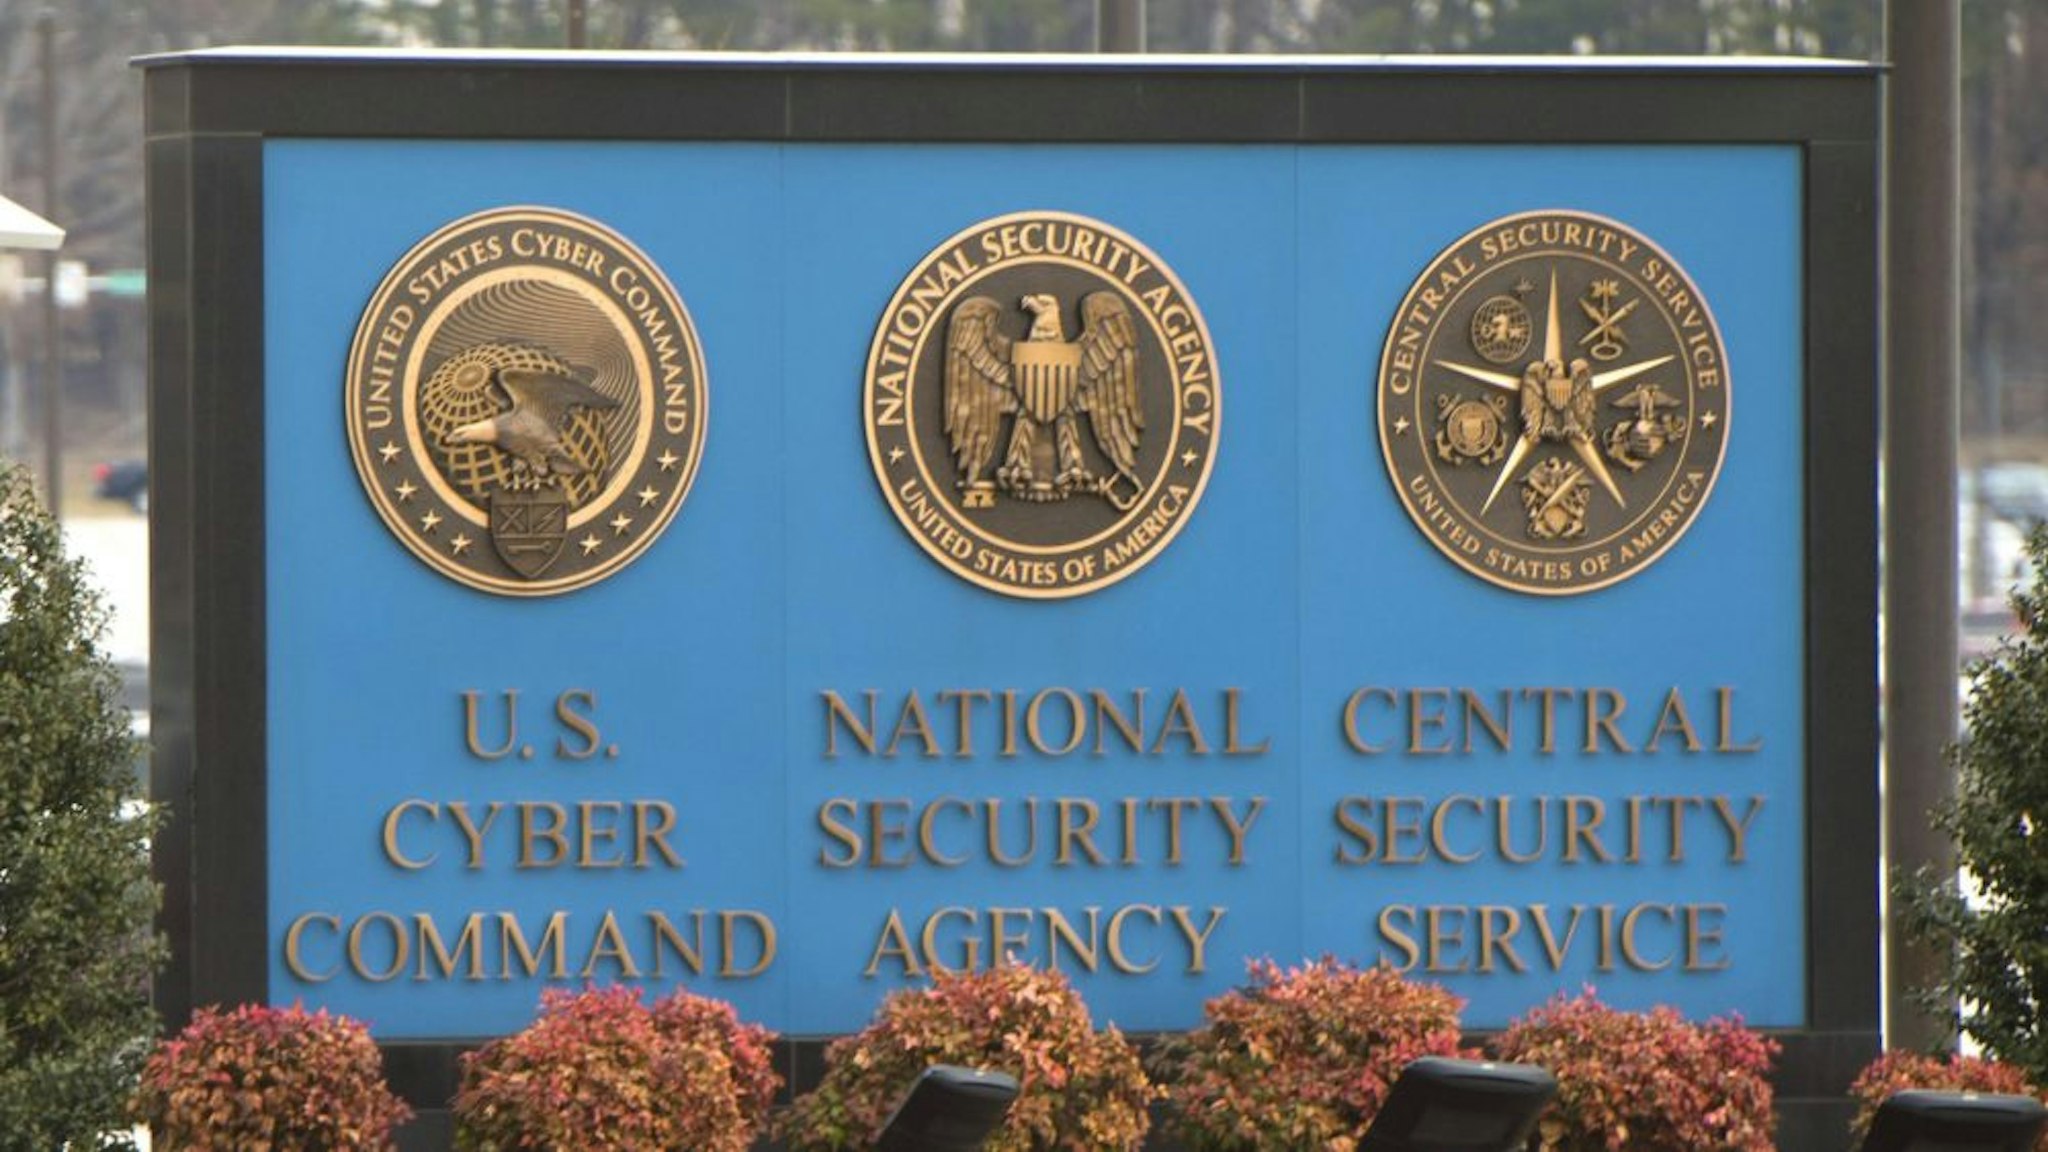 A sign for the National Security Agency (NSA), US Cyber Command and Central Security Service, is seen near the visitor's entrance to the headquarters of the National Security Agency (NSA) after a shooting incident at the entrance in Fort Meade, Maryland, February 14, 2018. - Shots were fired early Wednesday at the ultra-secret National Security Agency, the US electronic spying agency outside Washington, leaving one person injured, officials said. Aerial footage of the scene from NBC News showed a black SUV with numerous bullet holes in its windshield crashed into concrete barriers at the main entrance to the NSA's headquarters in Fort Meade, Maryland.